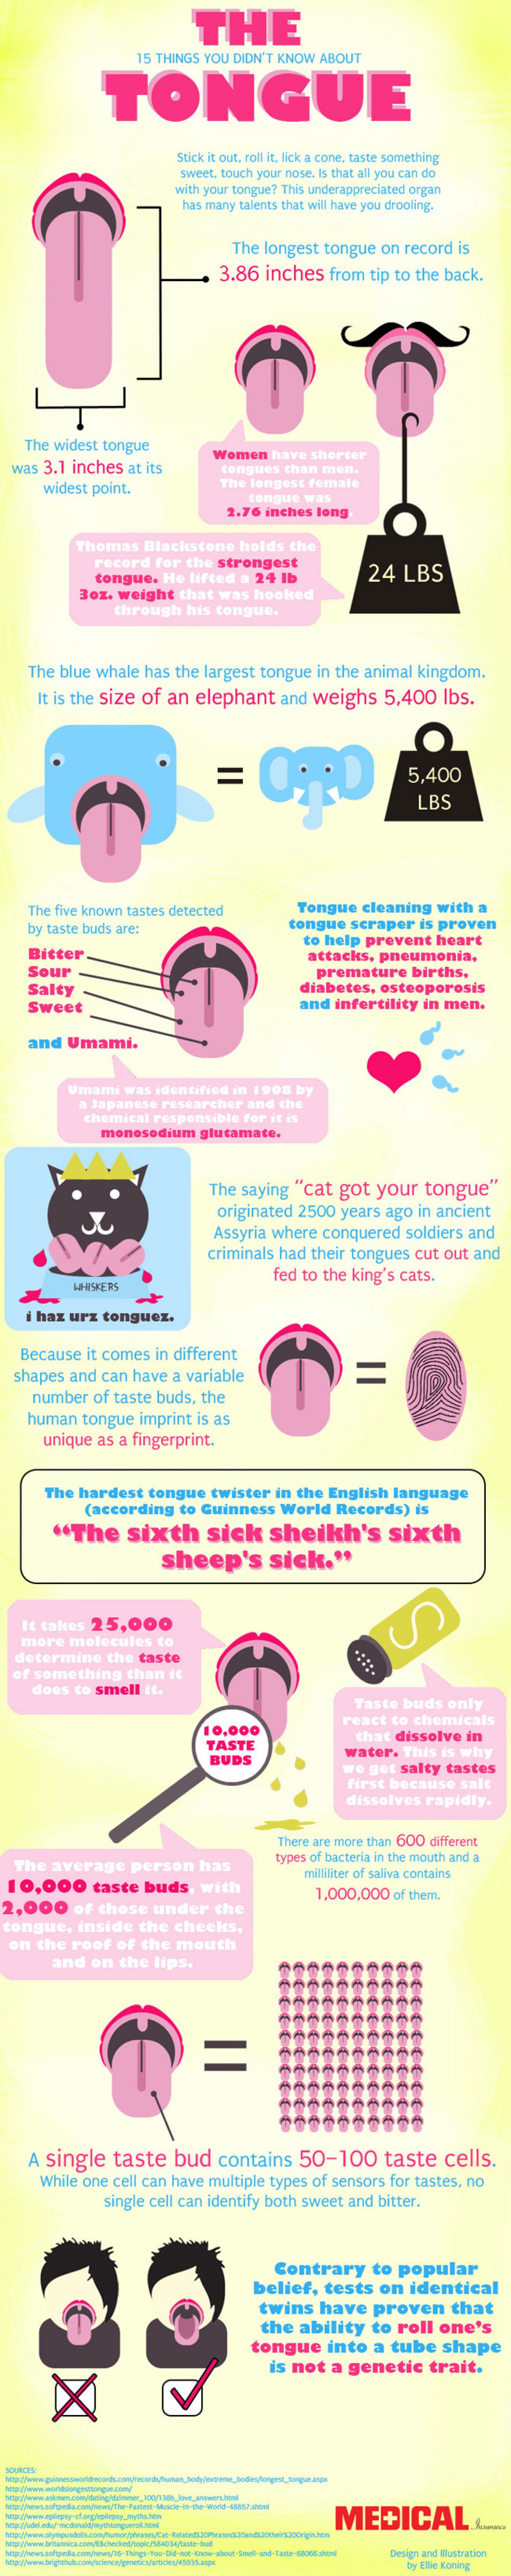 15-things-you-didnt-know-about-the-tongue_50290a77ed7c2_w1500